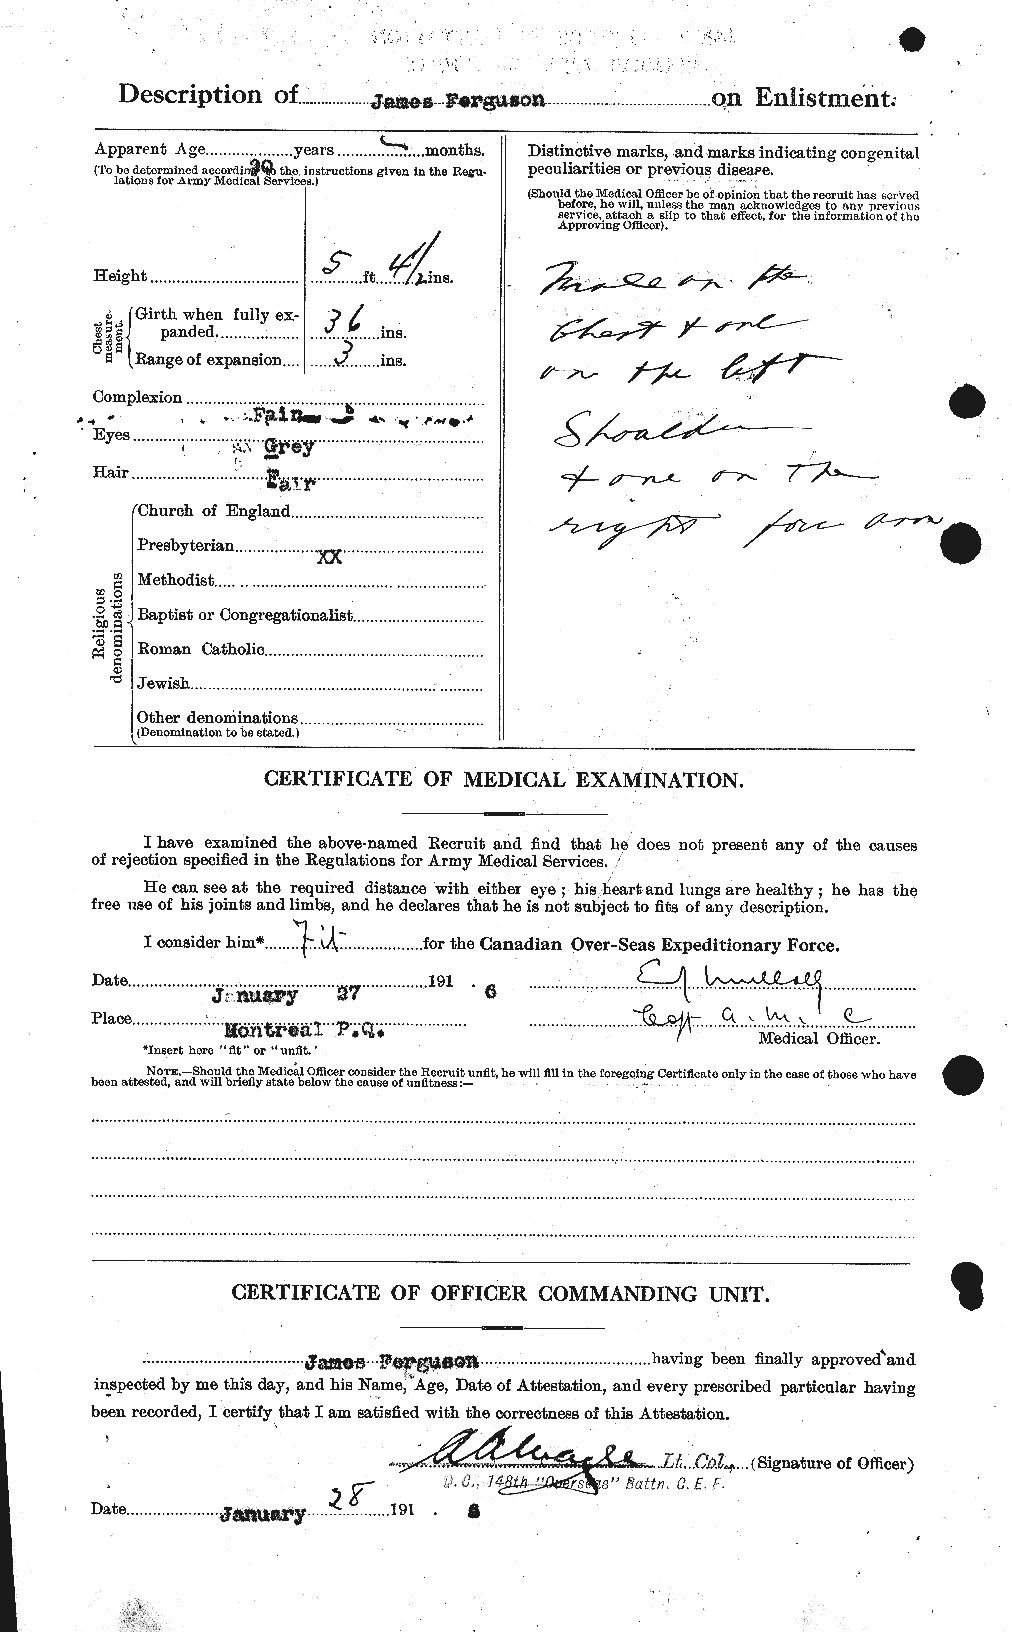 Personnel Records of the First World War - CEF 320226b